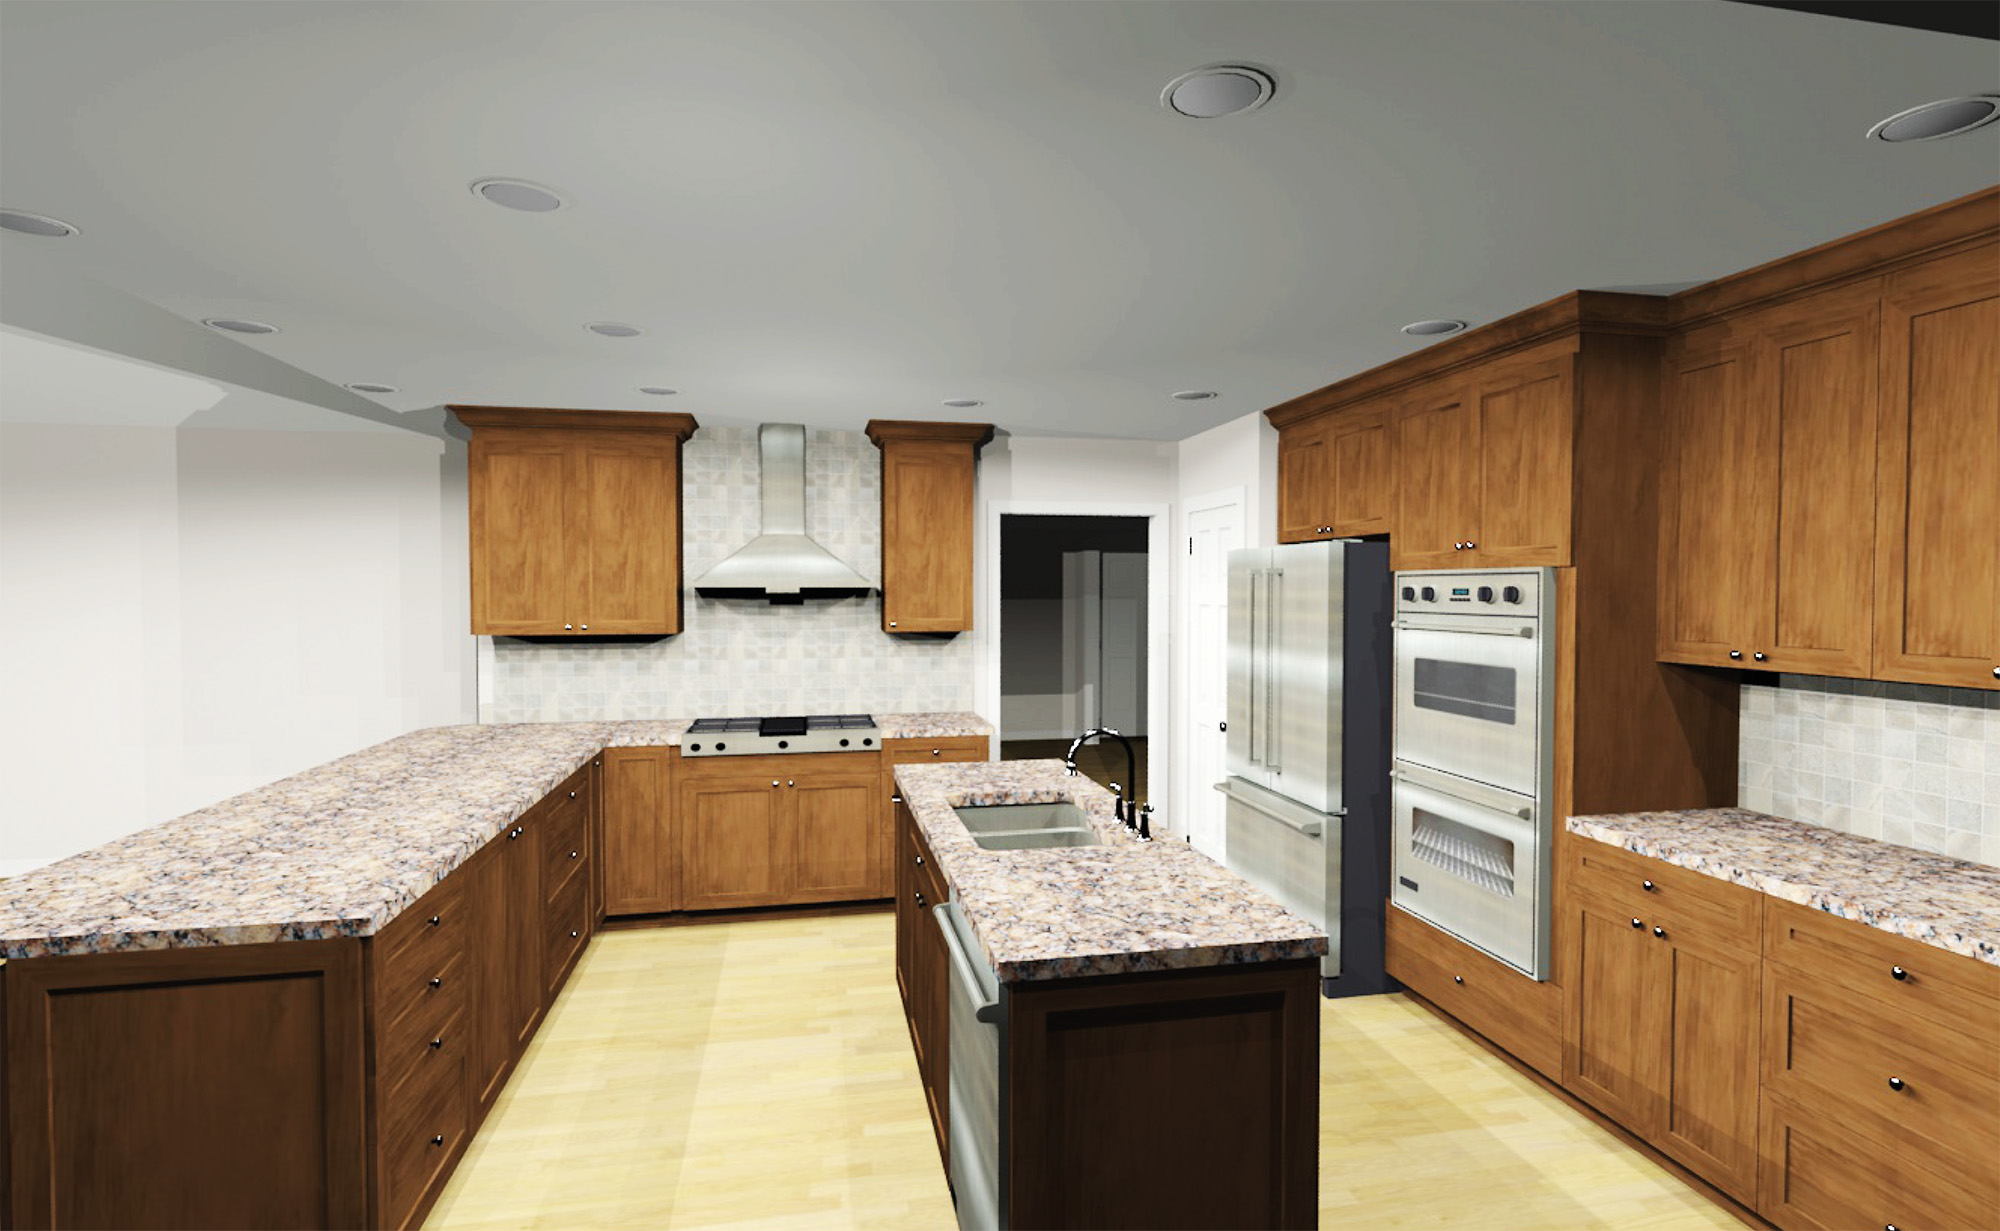 Accessible Kitchen - 3D Rendering